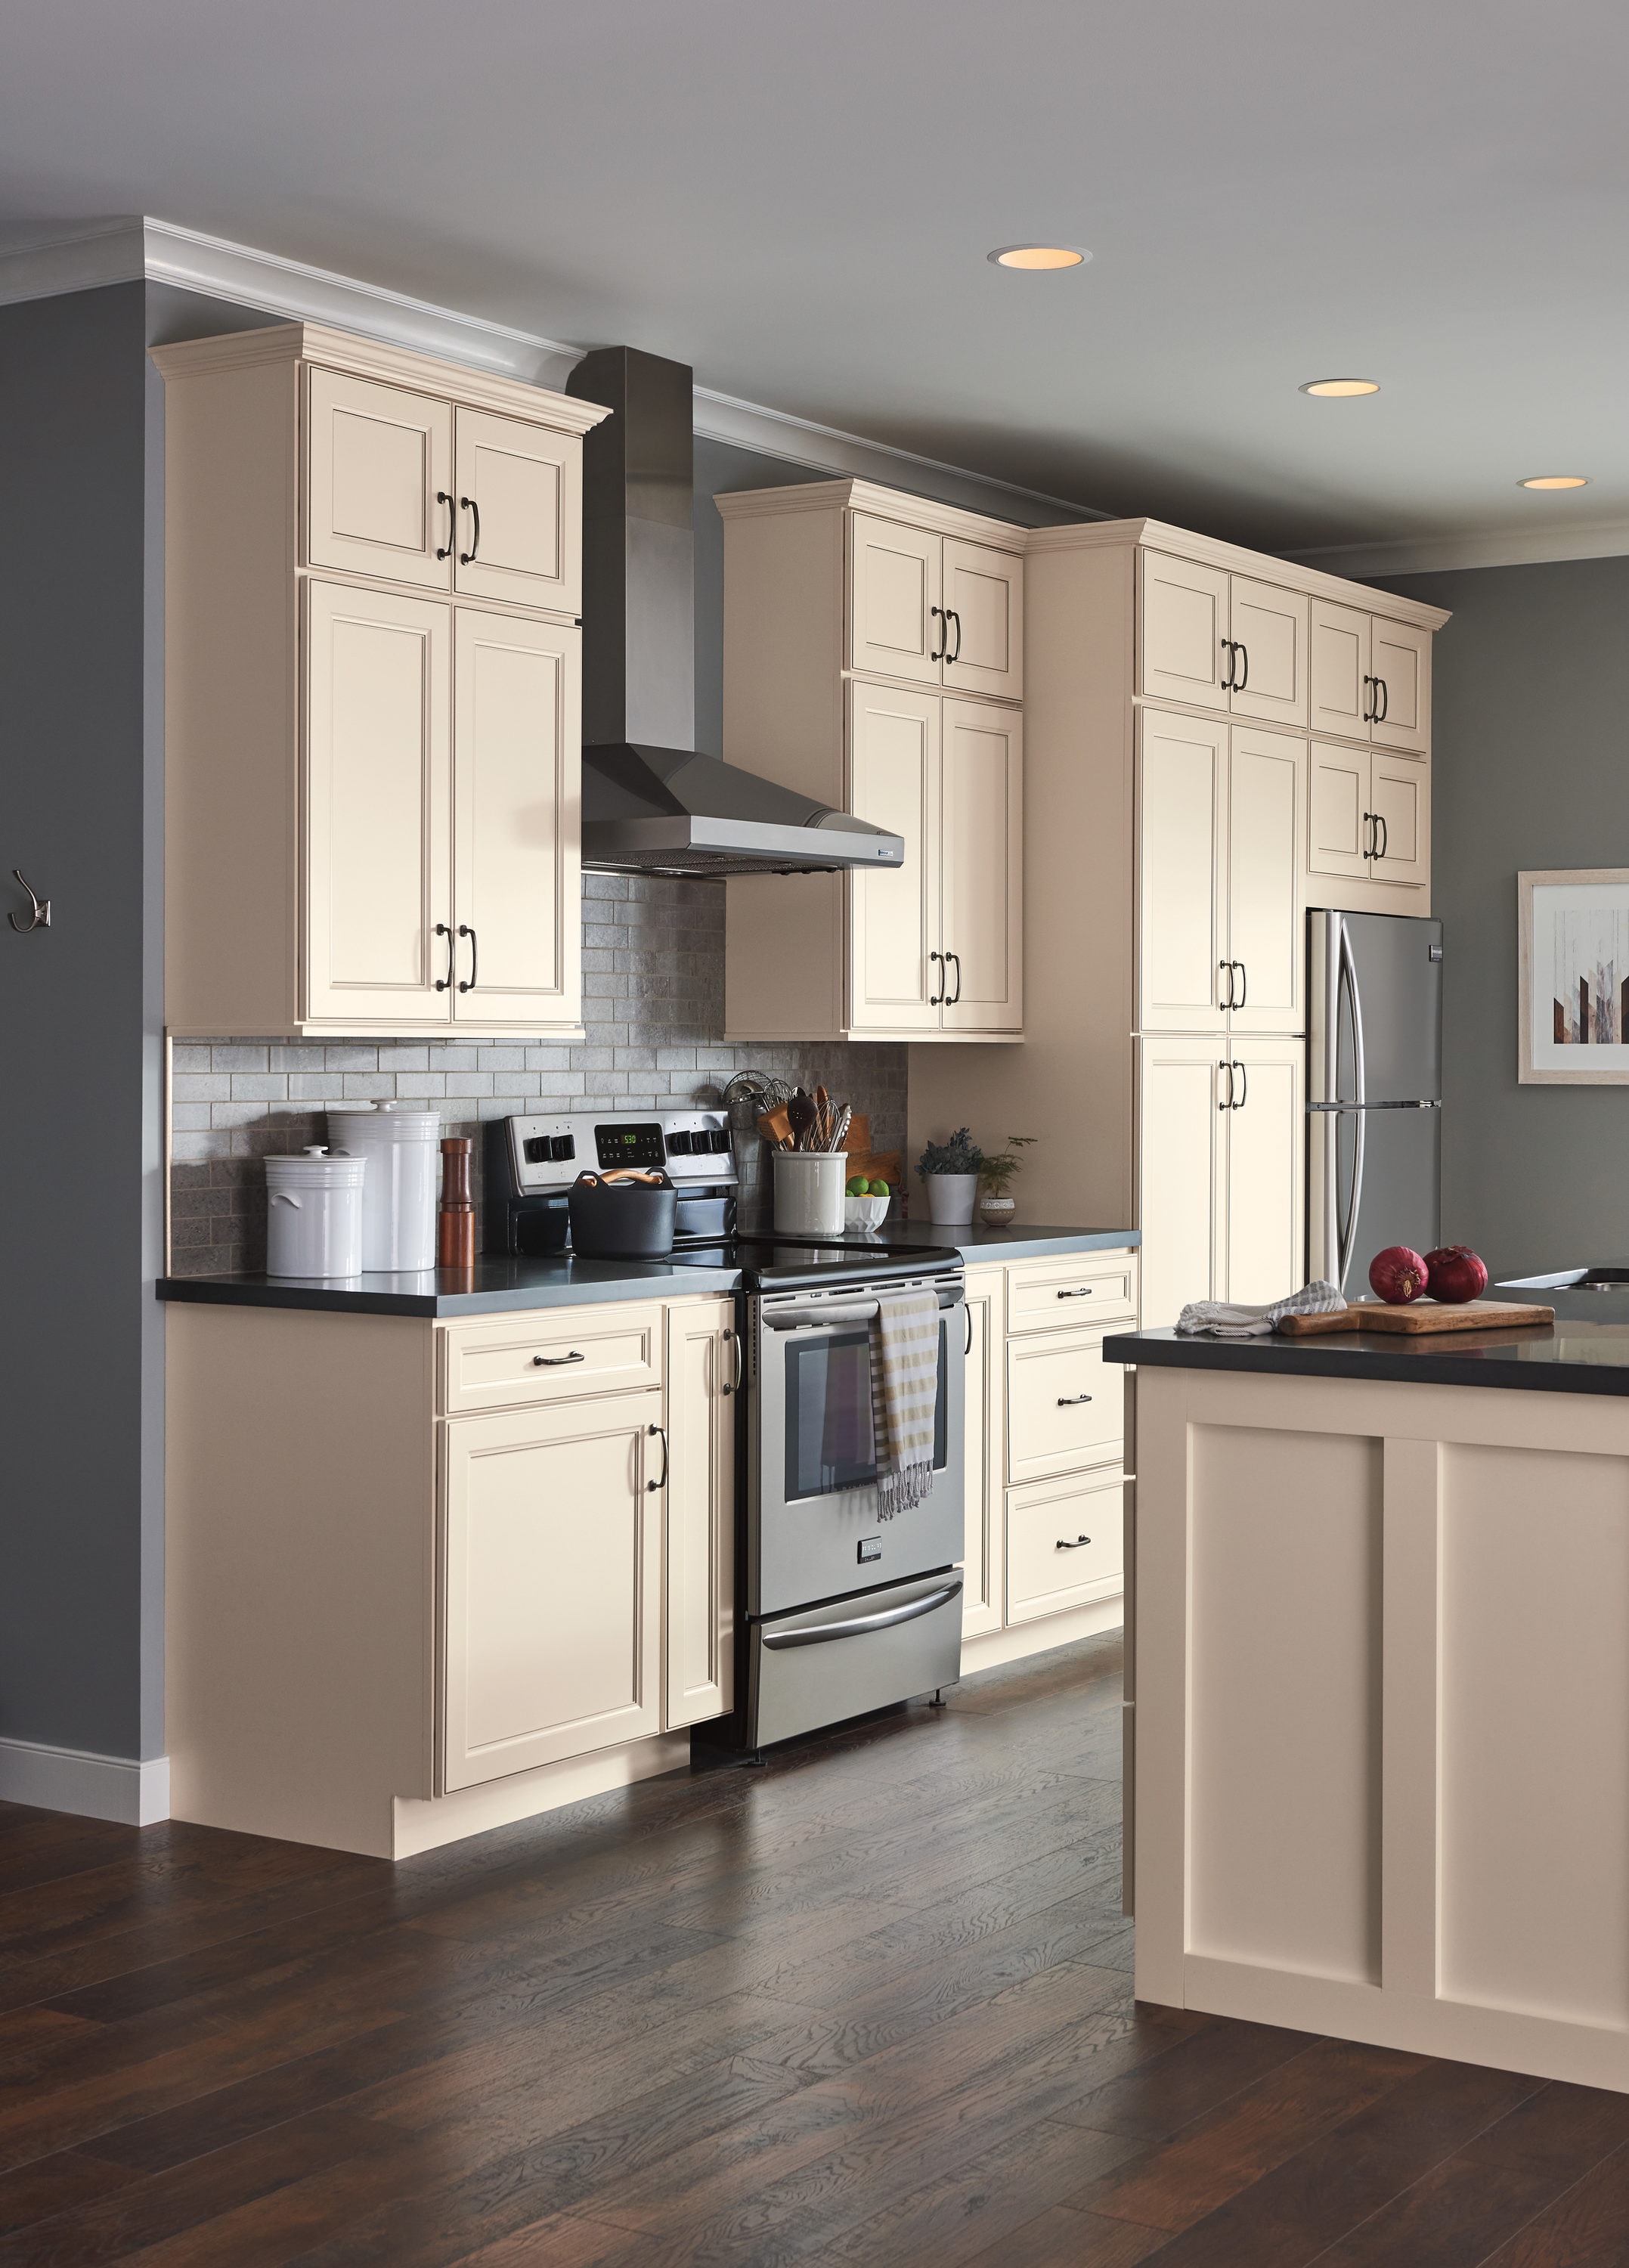 Diamond Now Caspian 15 In W X 35 H 23 75 D Toasted Antique Off White Door And Drawer Base Fully Assembled Cabinet Recessed Panel Square Style At Lowes Com